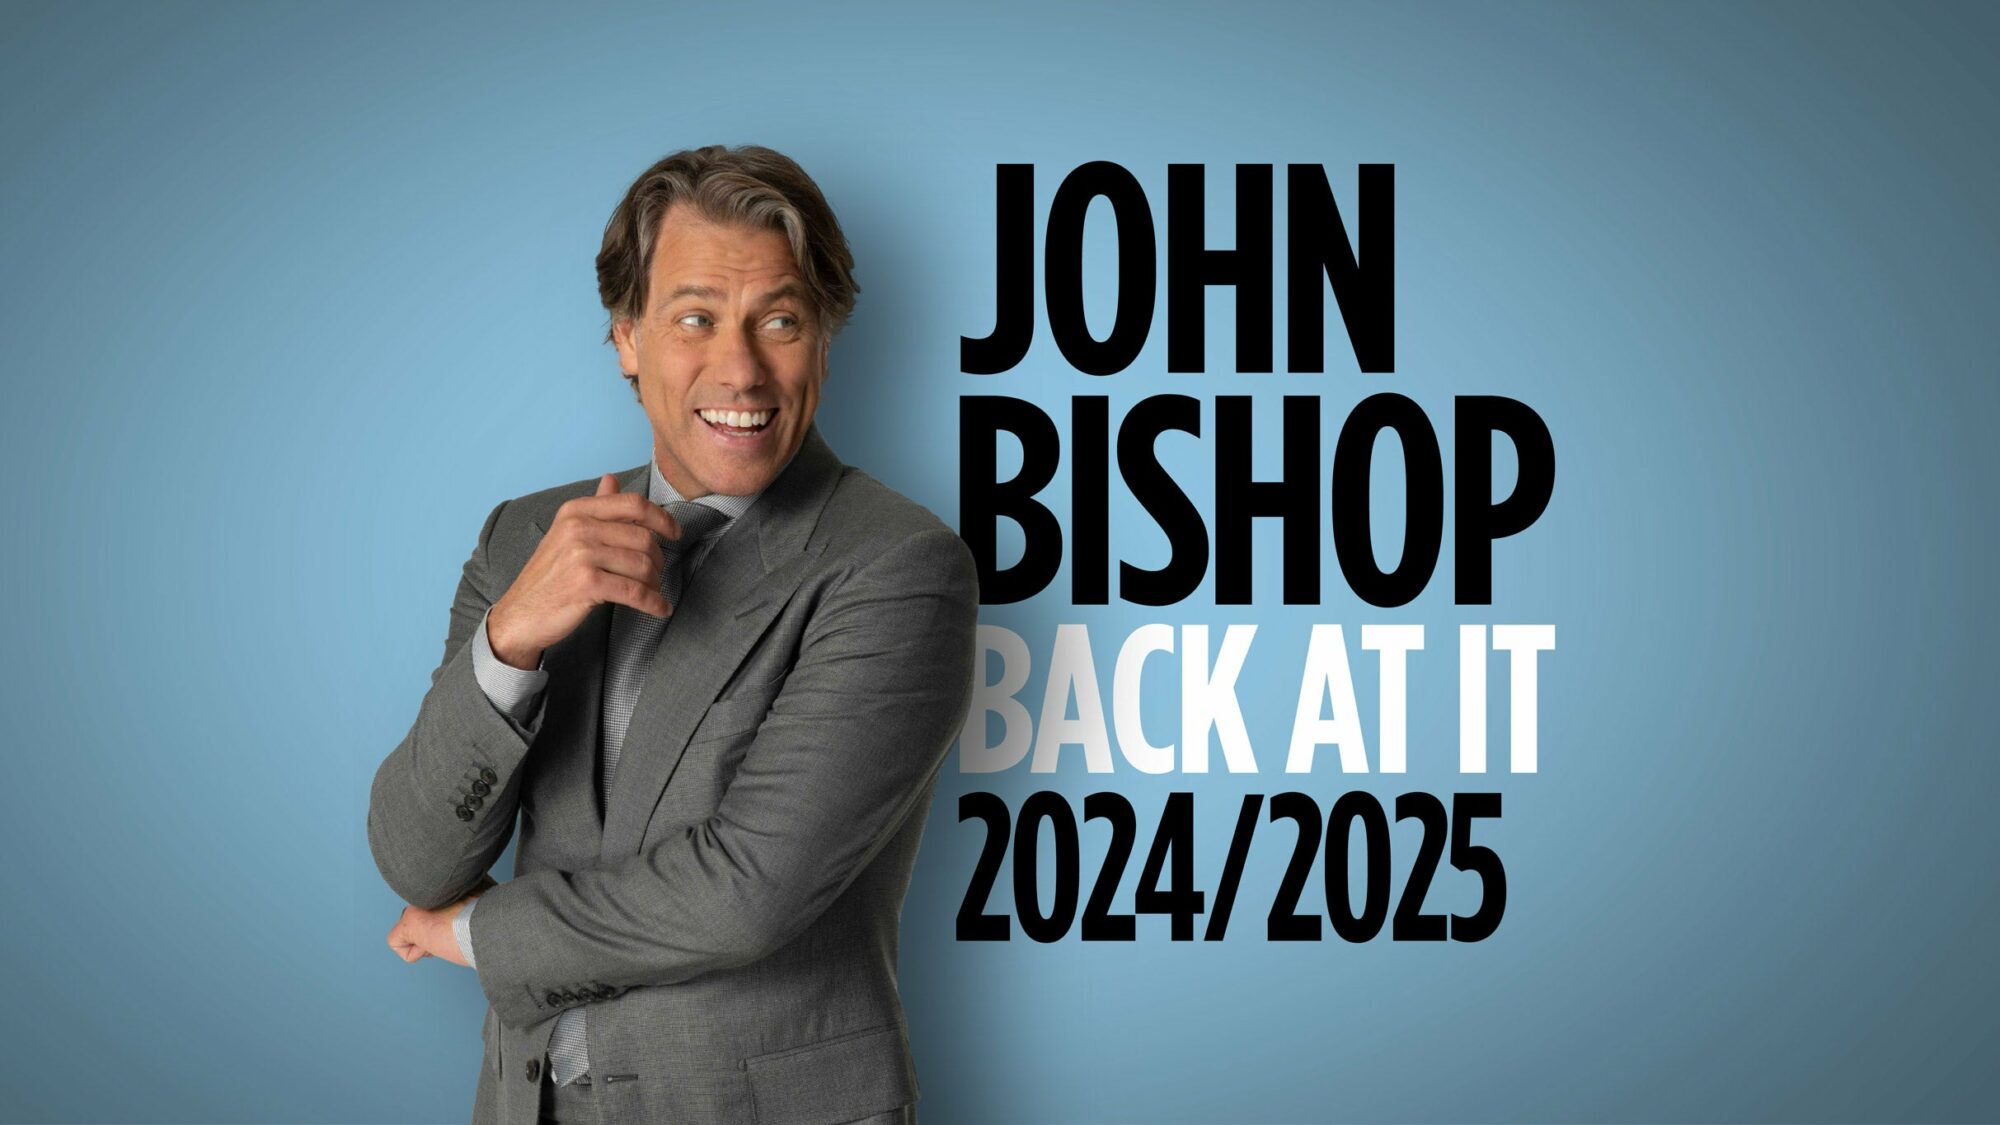 John Bishop – Back At It (BSL Show) at Sheffield City Hall Oval Hall, Sheffield